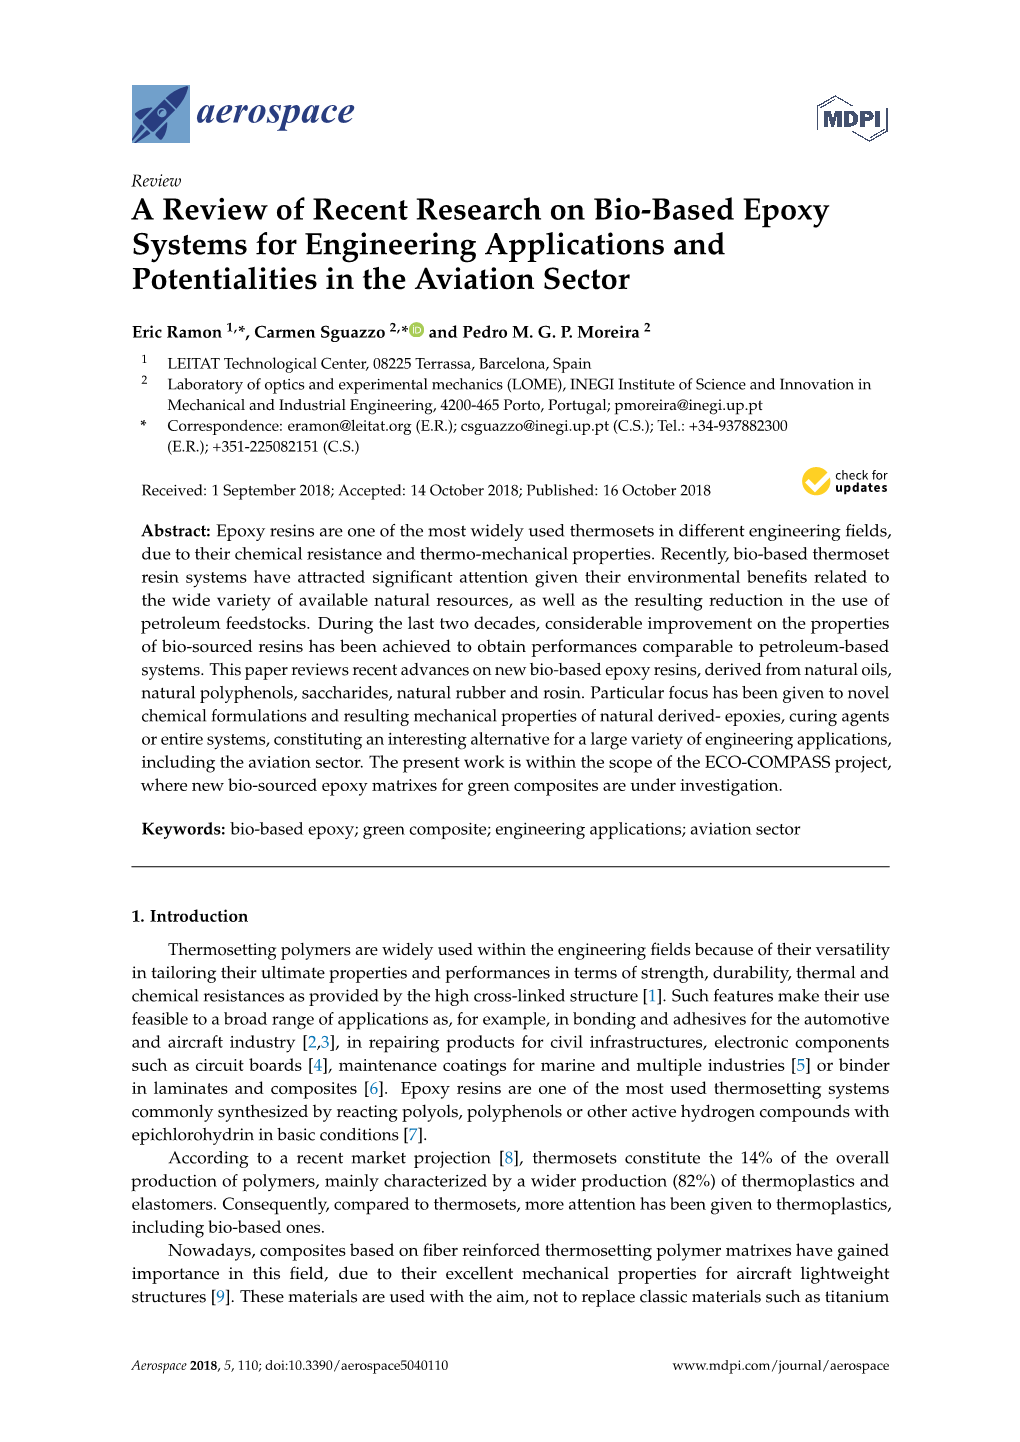 A Review of Recent Research on Bio-Based Epoxy Systems for Engineering Applications and Potentialities in the Aviation Sector